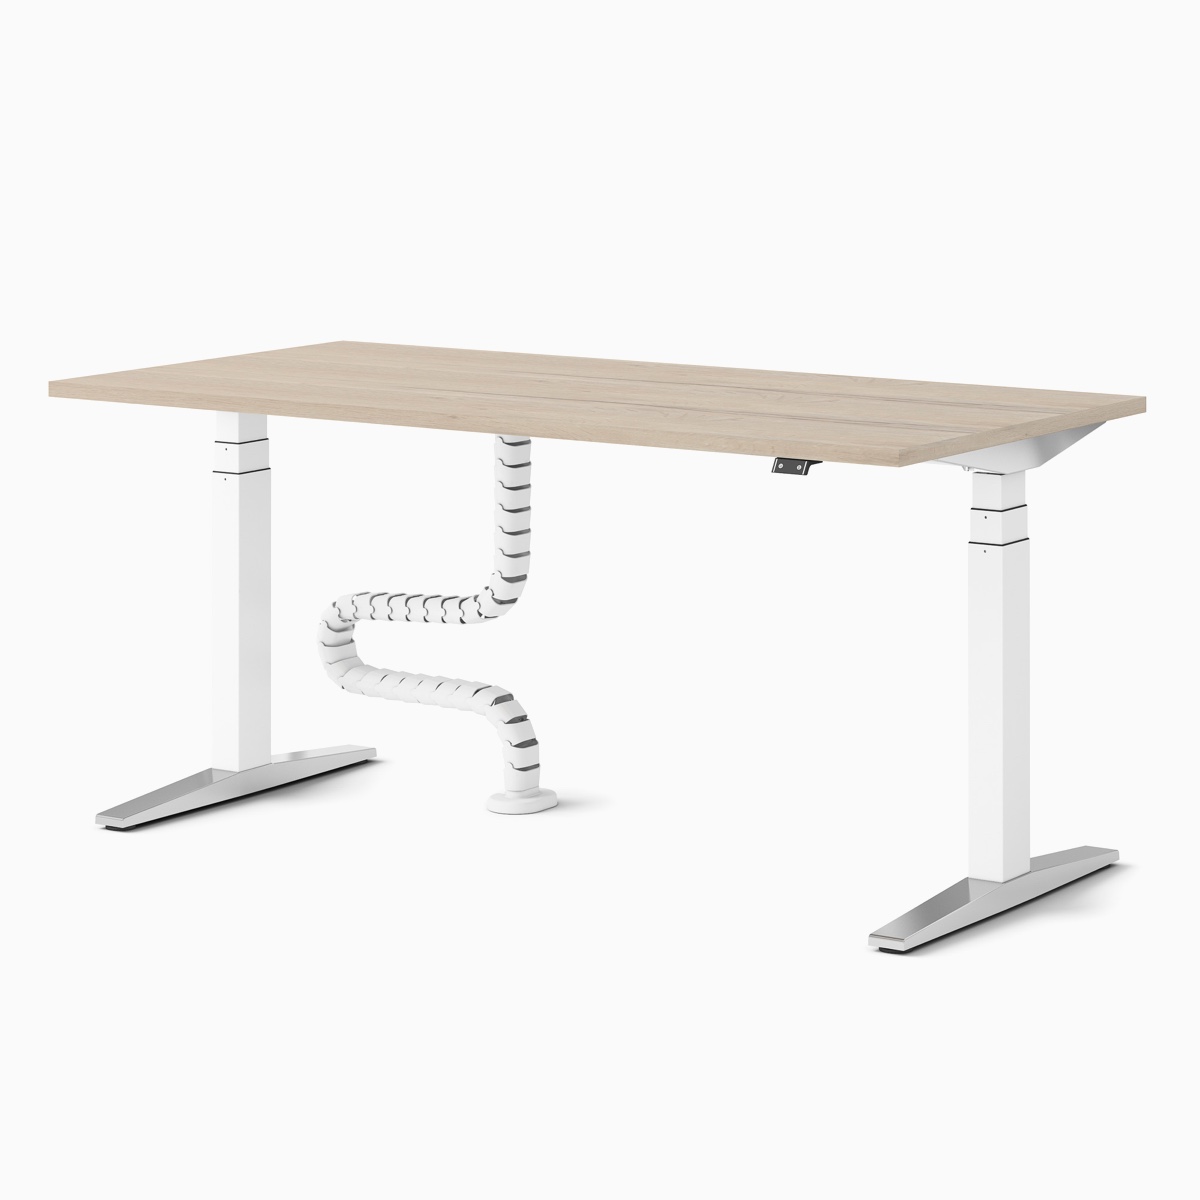 A single Ratio height-adjustable desk with a wooden worktop and floor-to-work-surface cable umbilical.